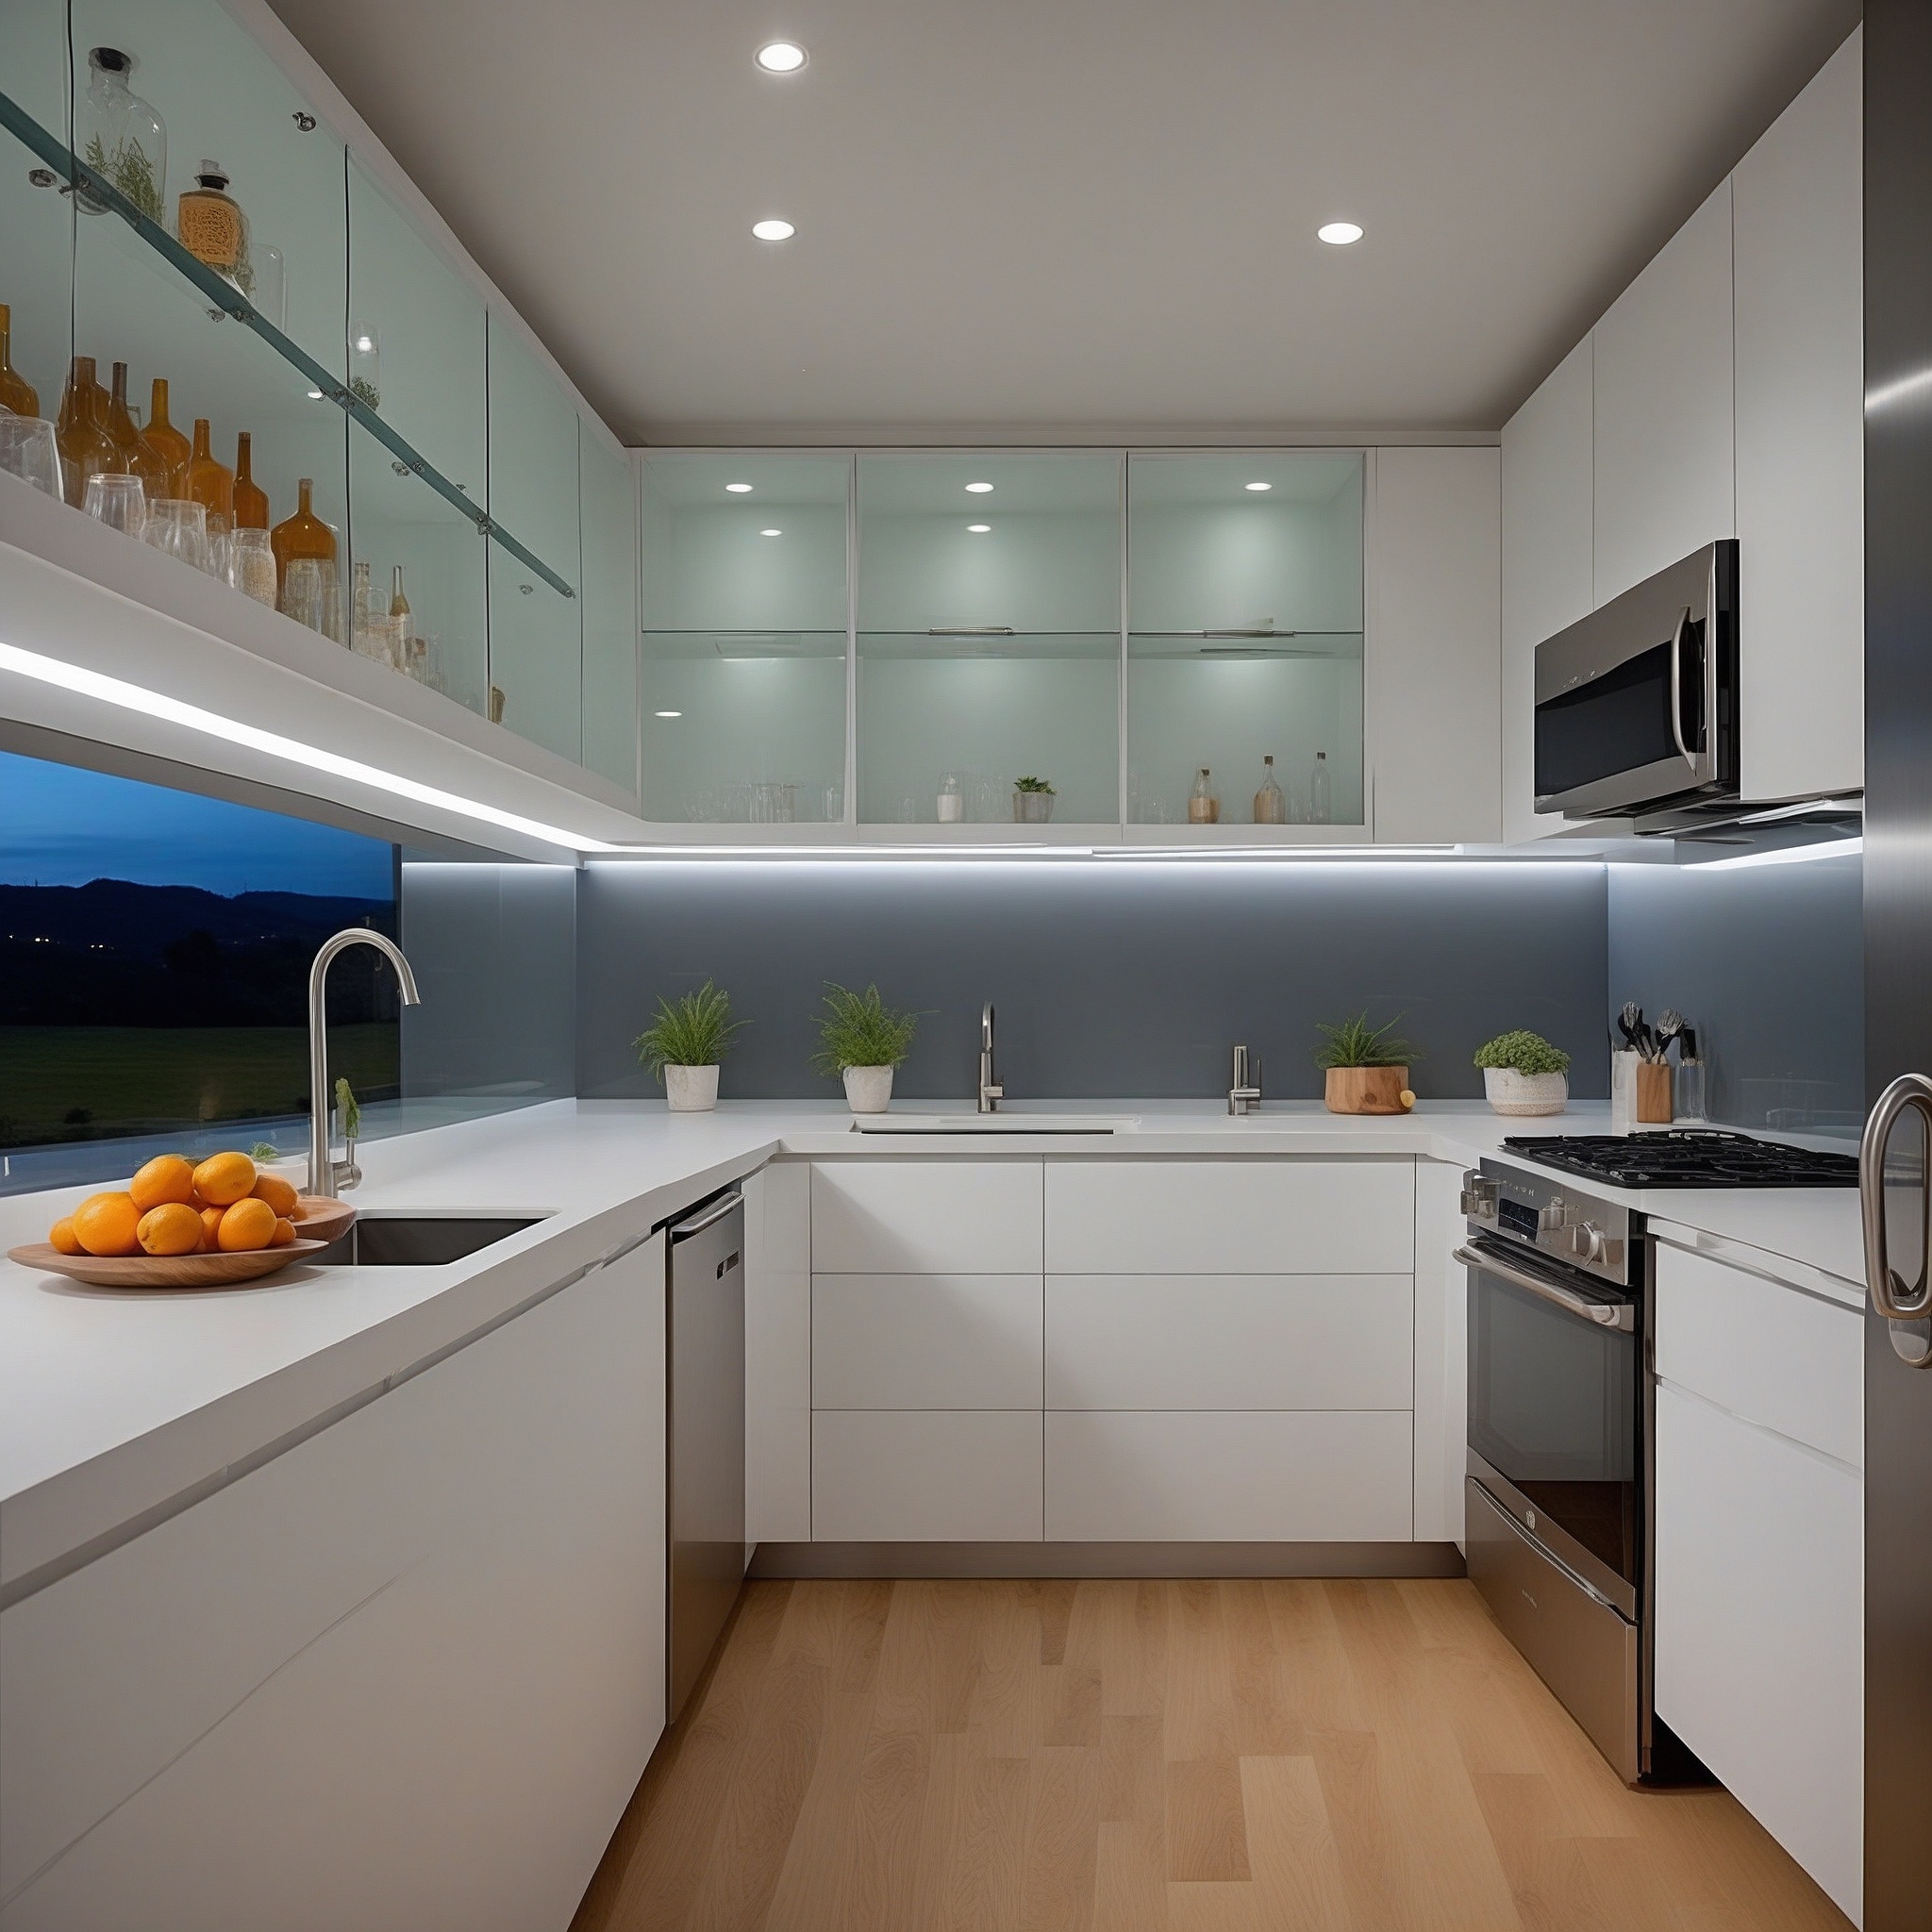 Sleek, Handleless Frosted Glass Cabinets in a Matte White Frame